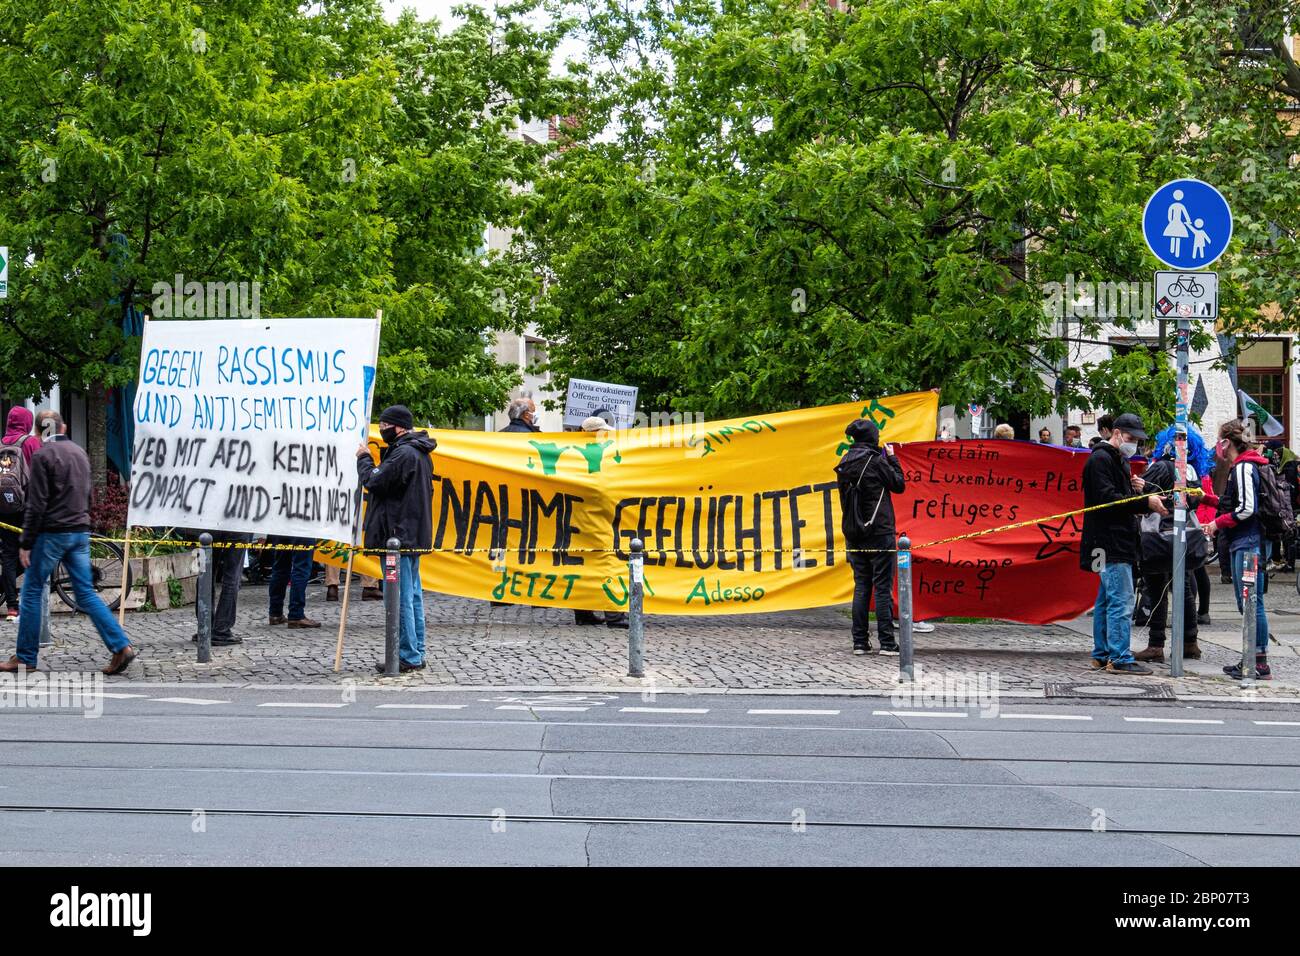 Mitte, Berlin, Germany. 16th May 2020 Small left wing demonstration opposing Racism during the COVID-19 pandemic. Demonstrators expressed anger that the Right wing Protesters were allowed a more prominent and larger area in front of the Volksbuhne theater. The Right and Left wing protests were contained by large numbers of police officers and several arrests were made. Stock Photo